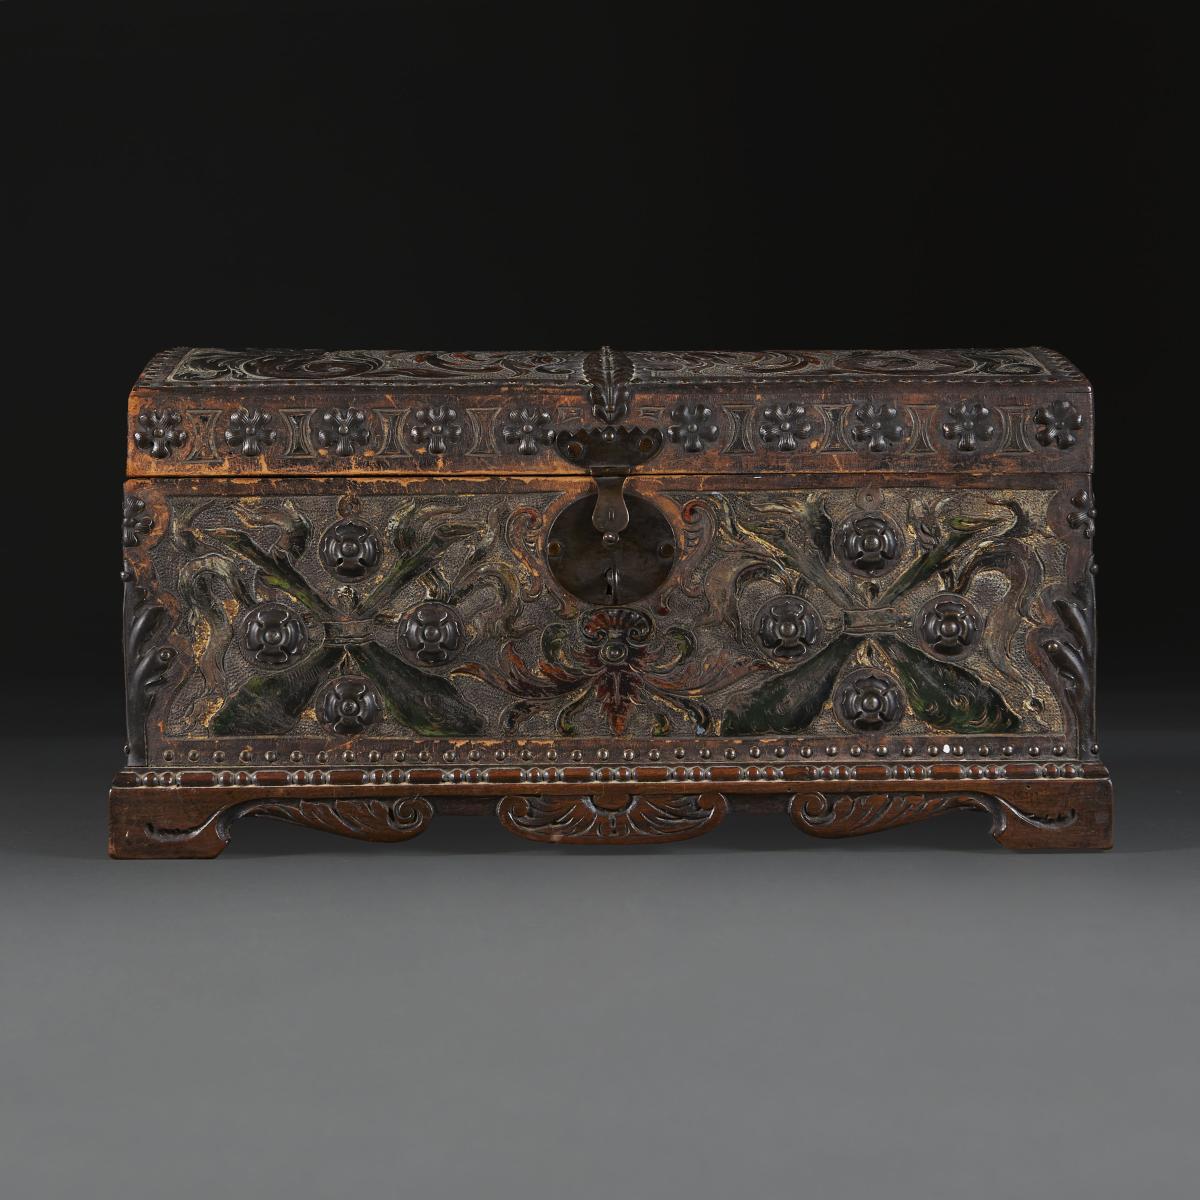 A 19th Century Spanish Tooled Leather Casket